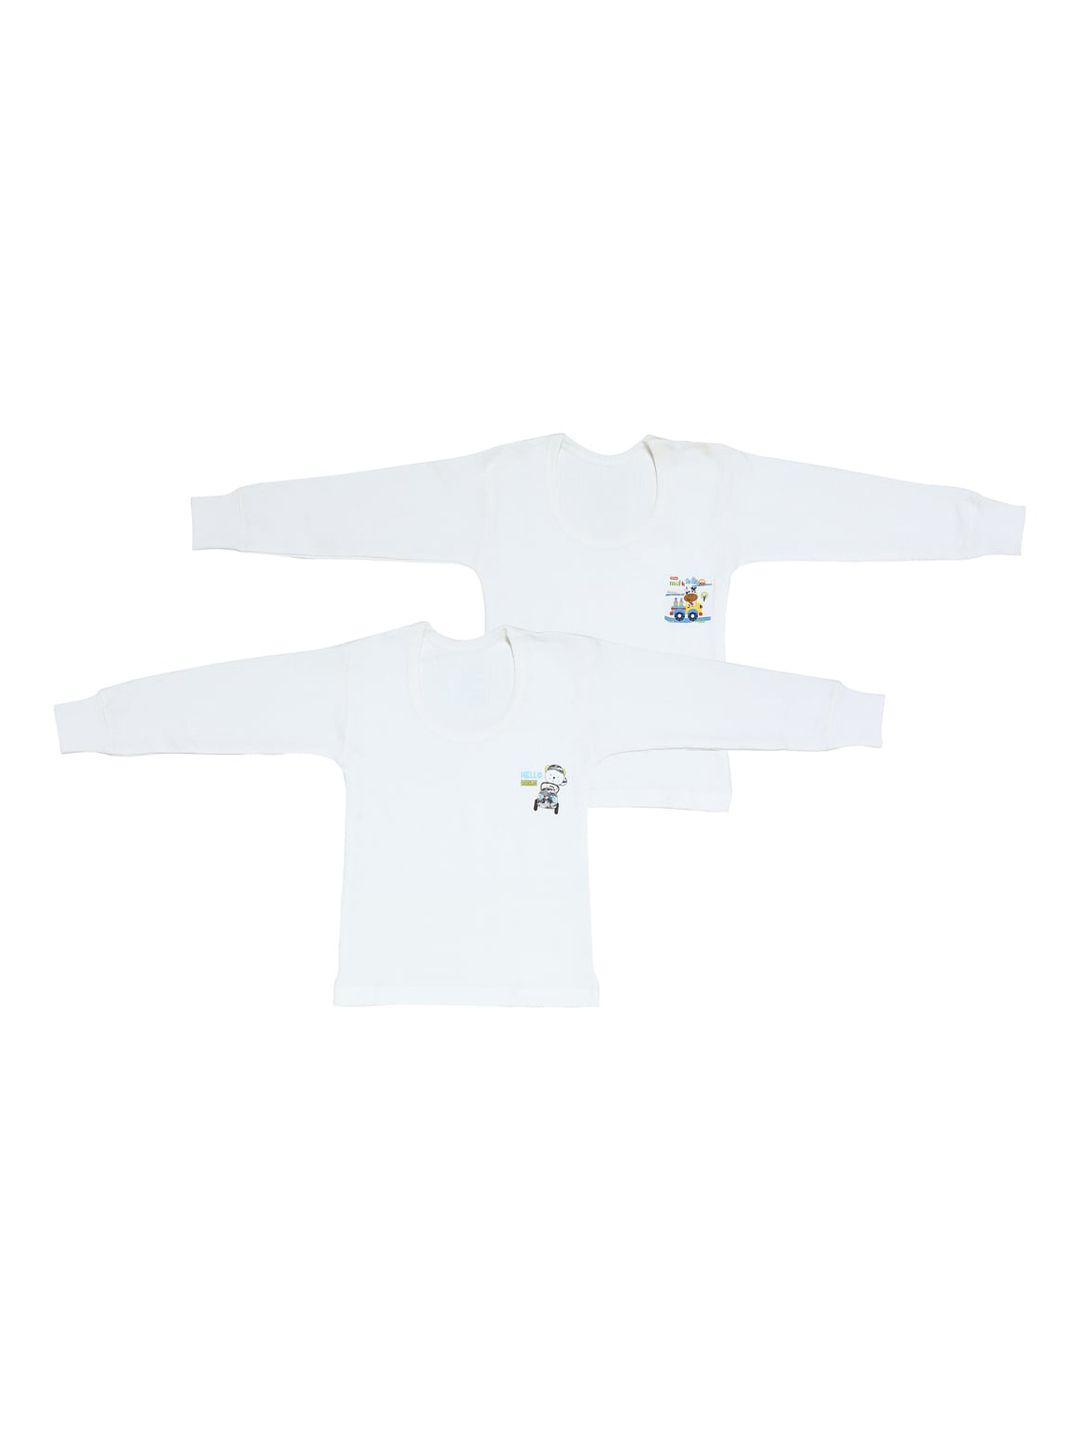 yk-unisex-kids-pack-of-2-solid-off-white-thermal-tops